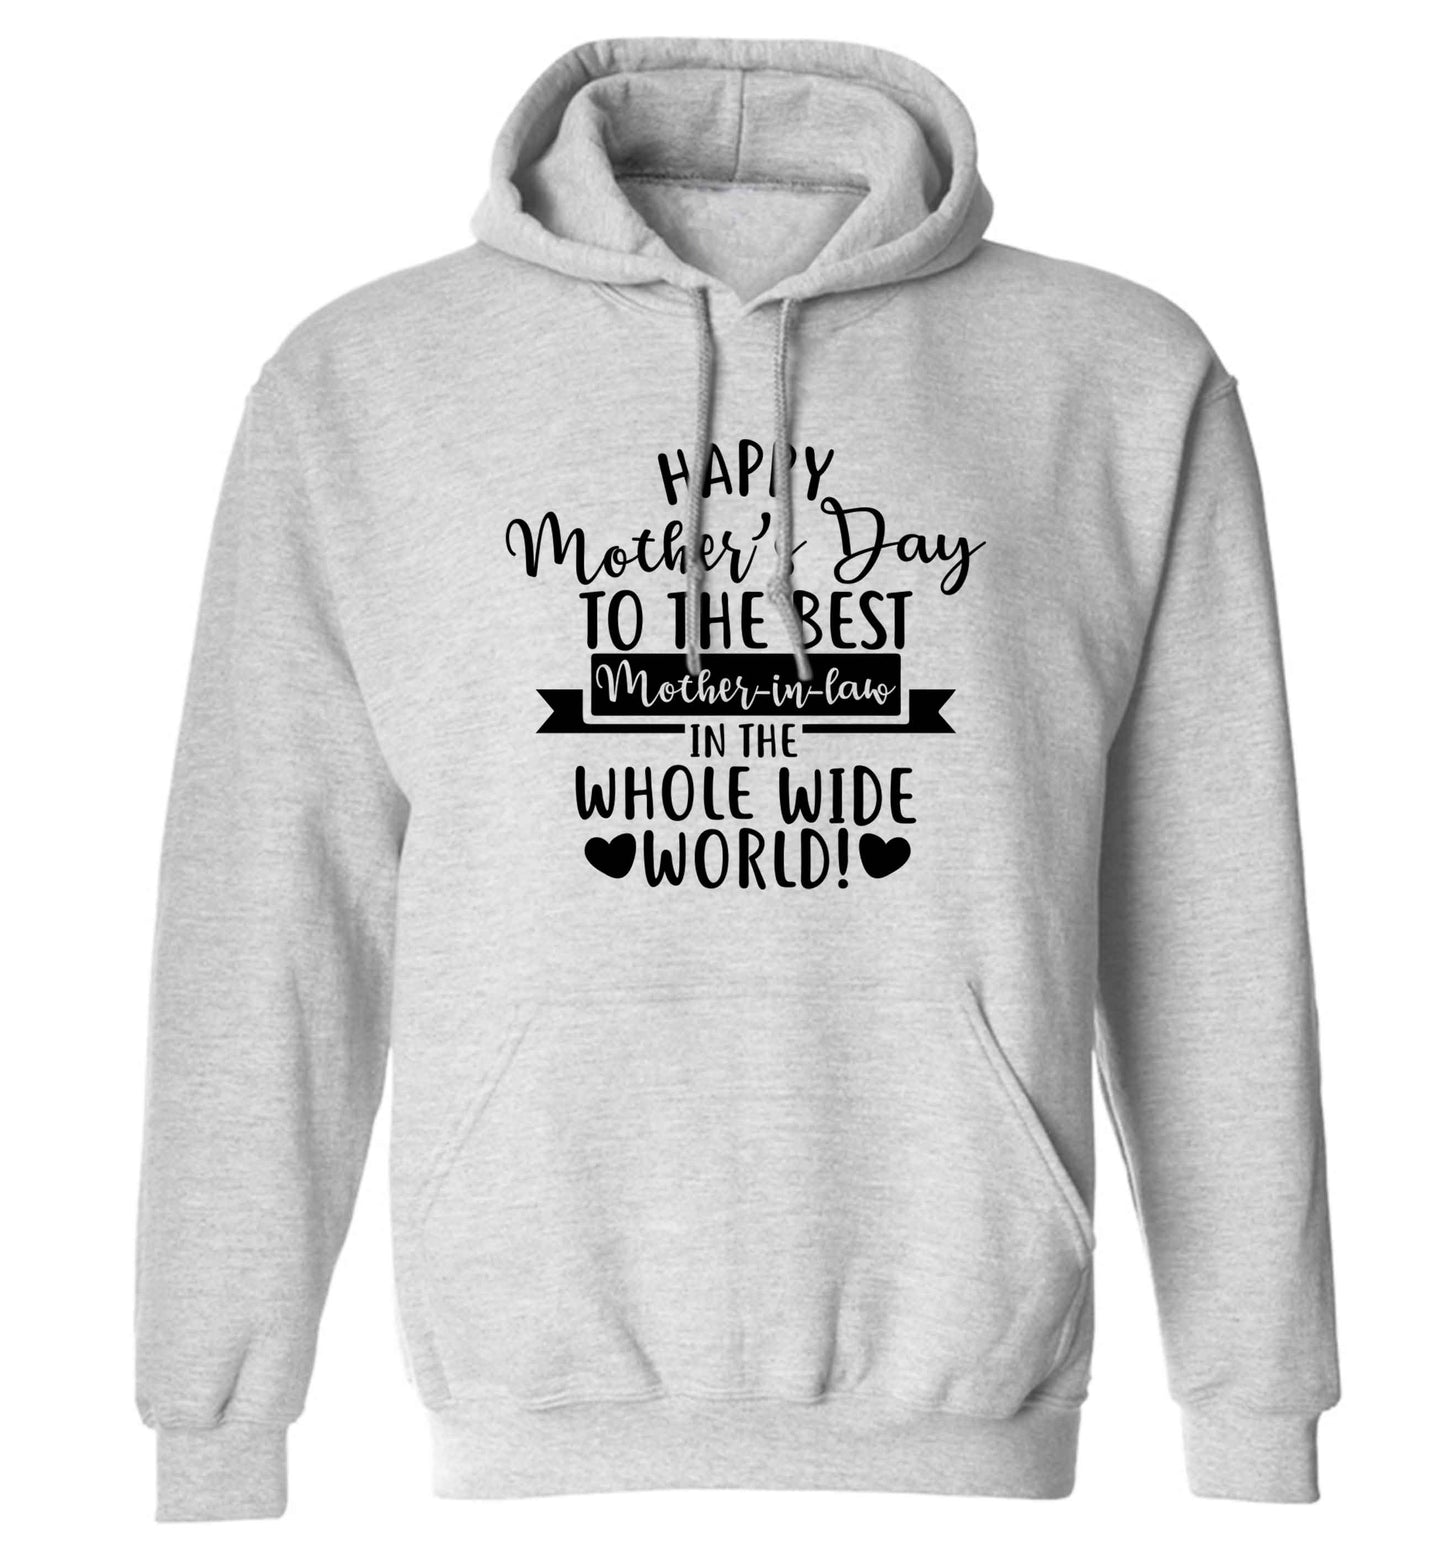 Happy mother's day to the best mother-in law in the world adults unisex grey hoodie 2XL